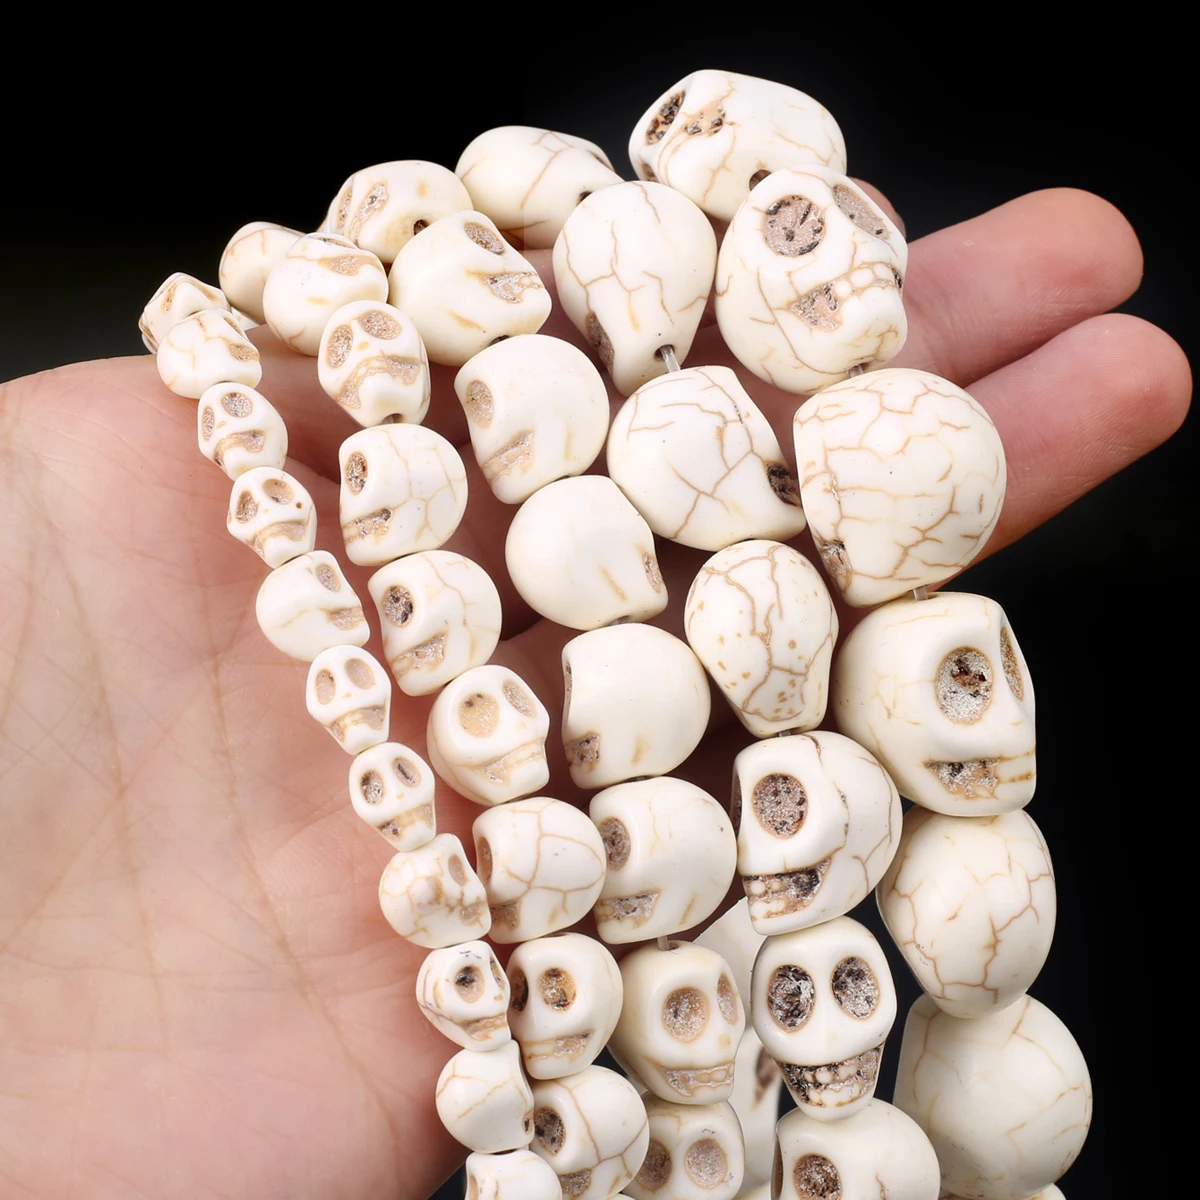 Skull Natural Stone Beads Blue White Turquoise Loose Spacer Beads for DIY Bracelet Necklace Making Jewelry Accessories Multisize